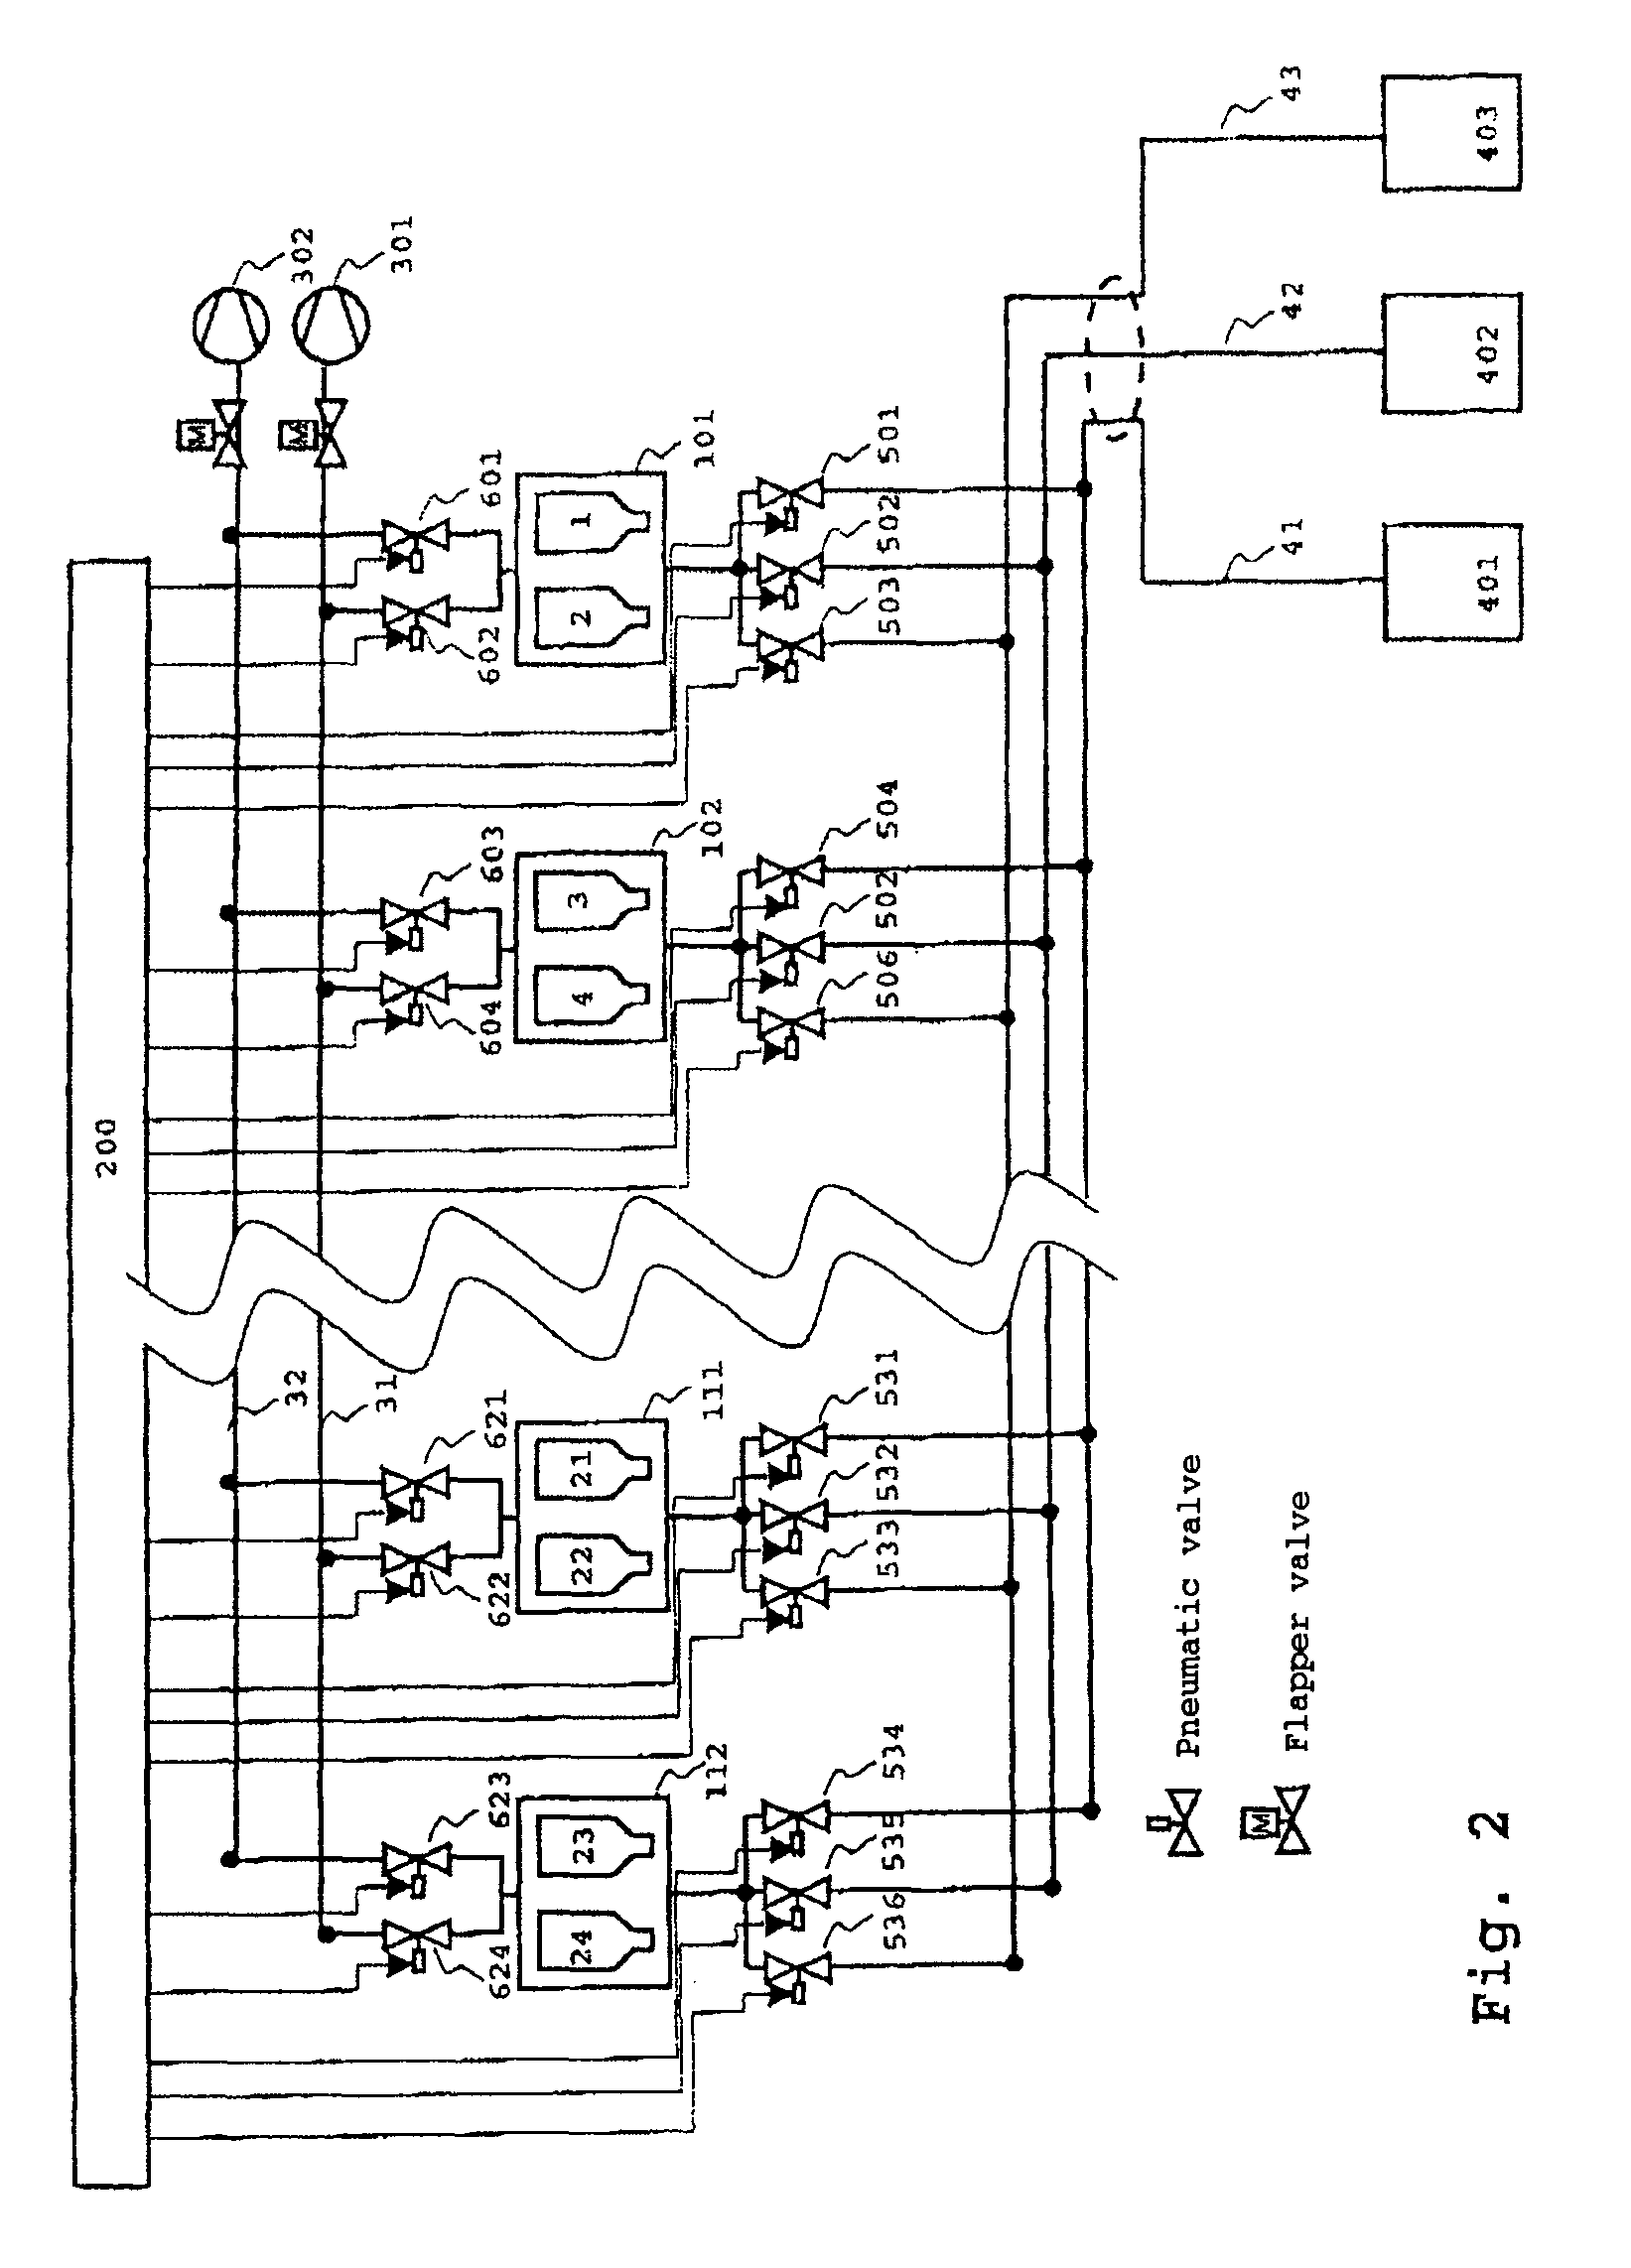 Method and apparatus for treating substrates in a rotary installation